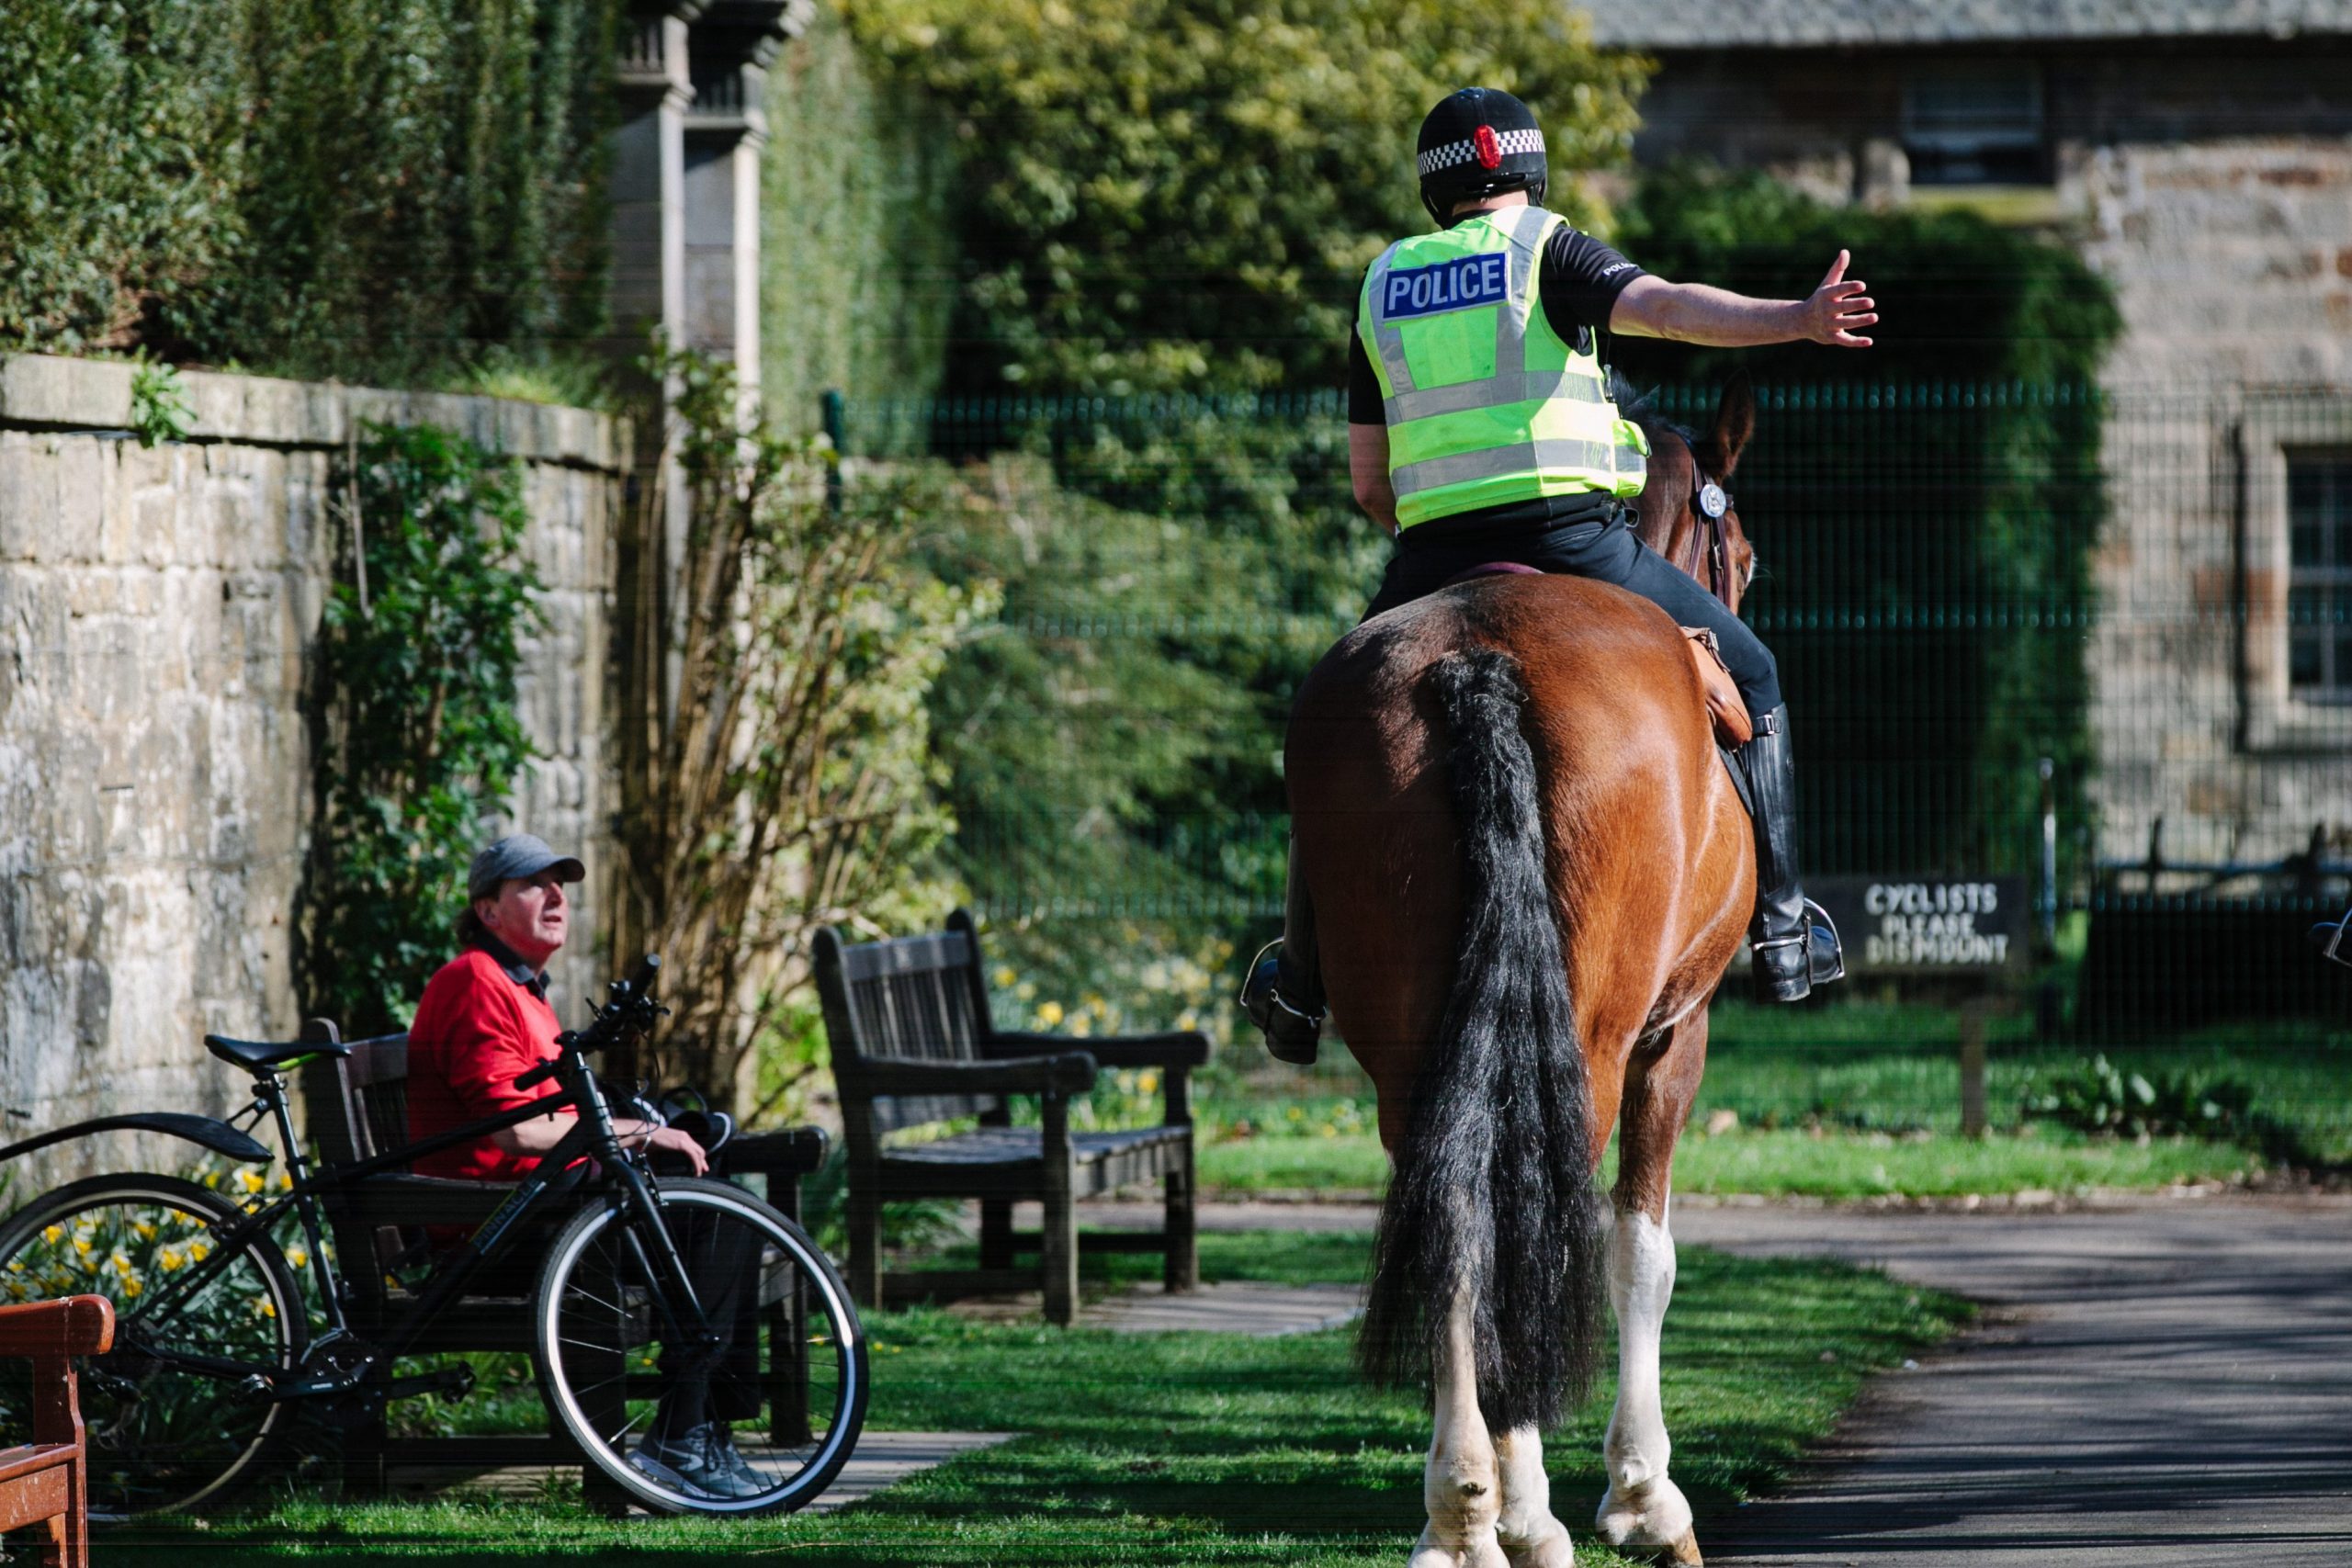 Police on horseback patrolling Pollok Park in Glasgow, asking people to move along during lockdown.